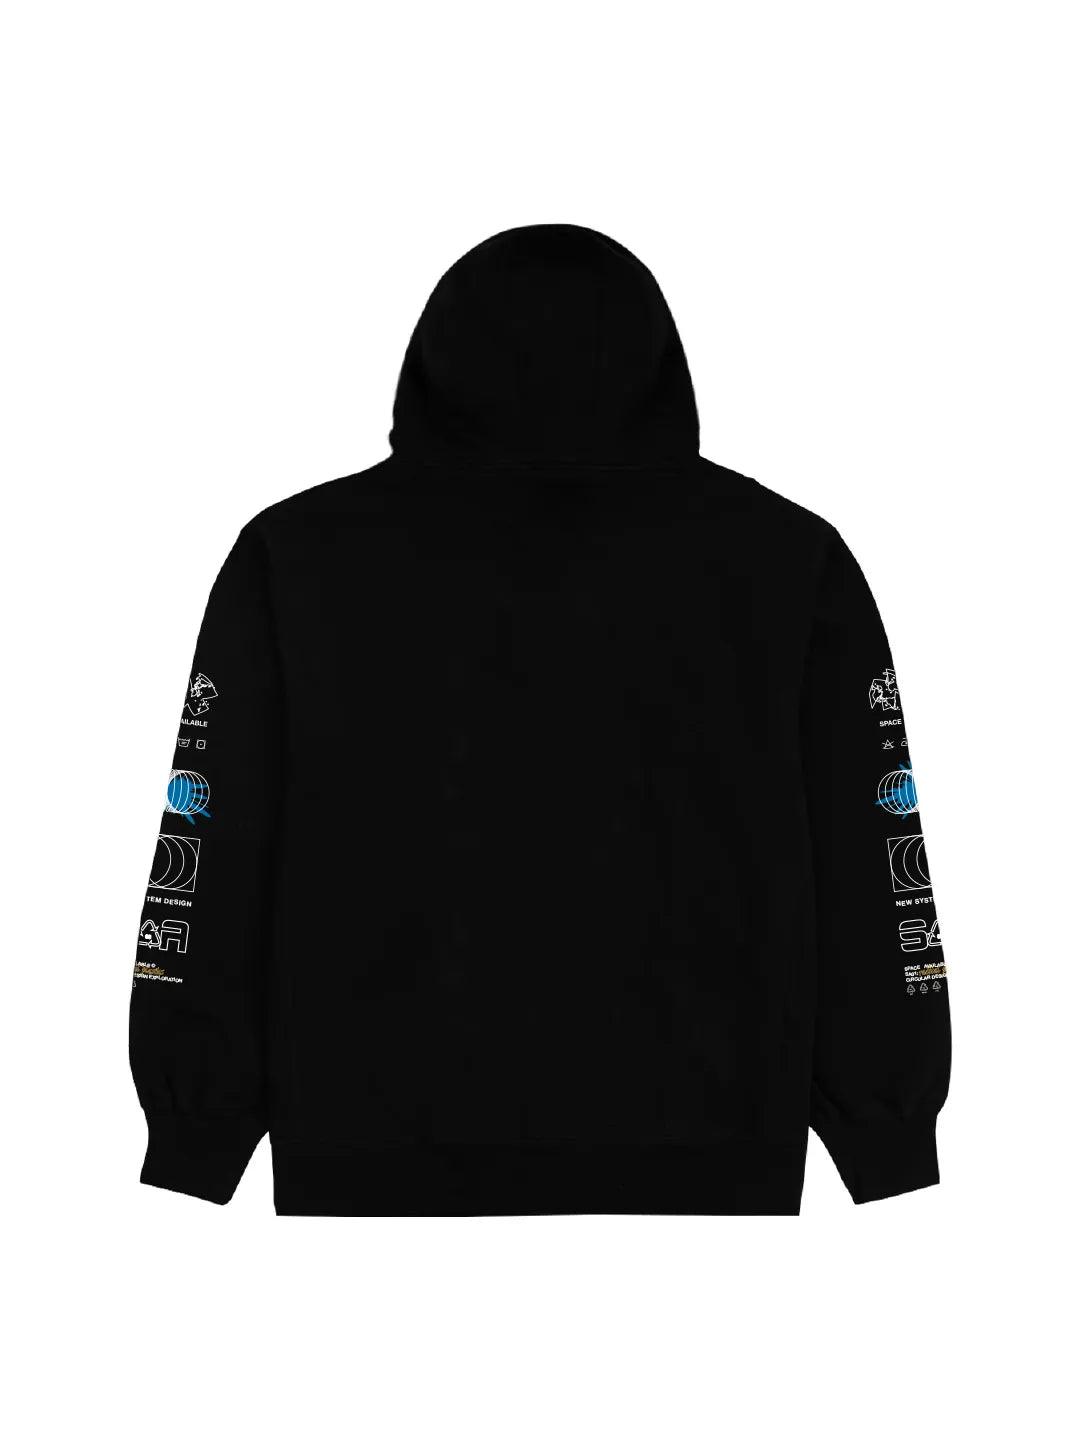 Space available Mediation Hoody - Black - SUPERCONSCIOUS BERLIN